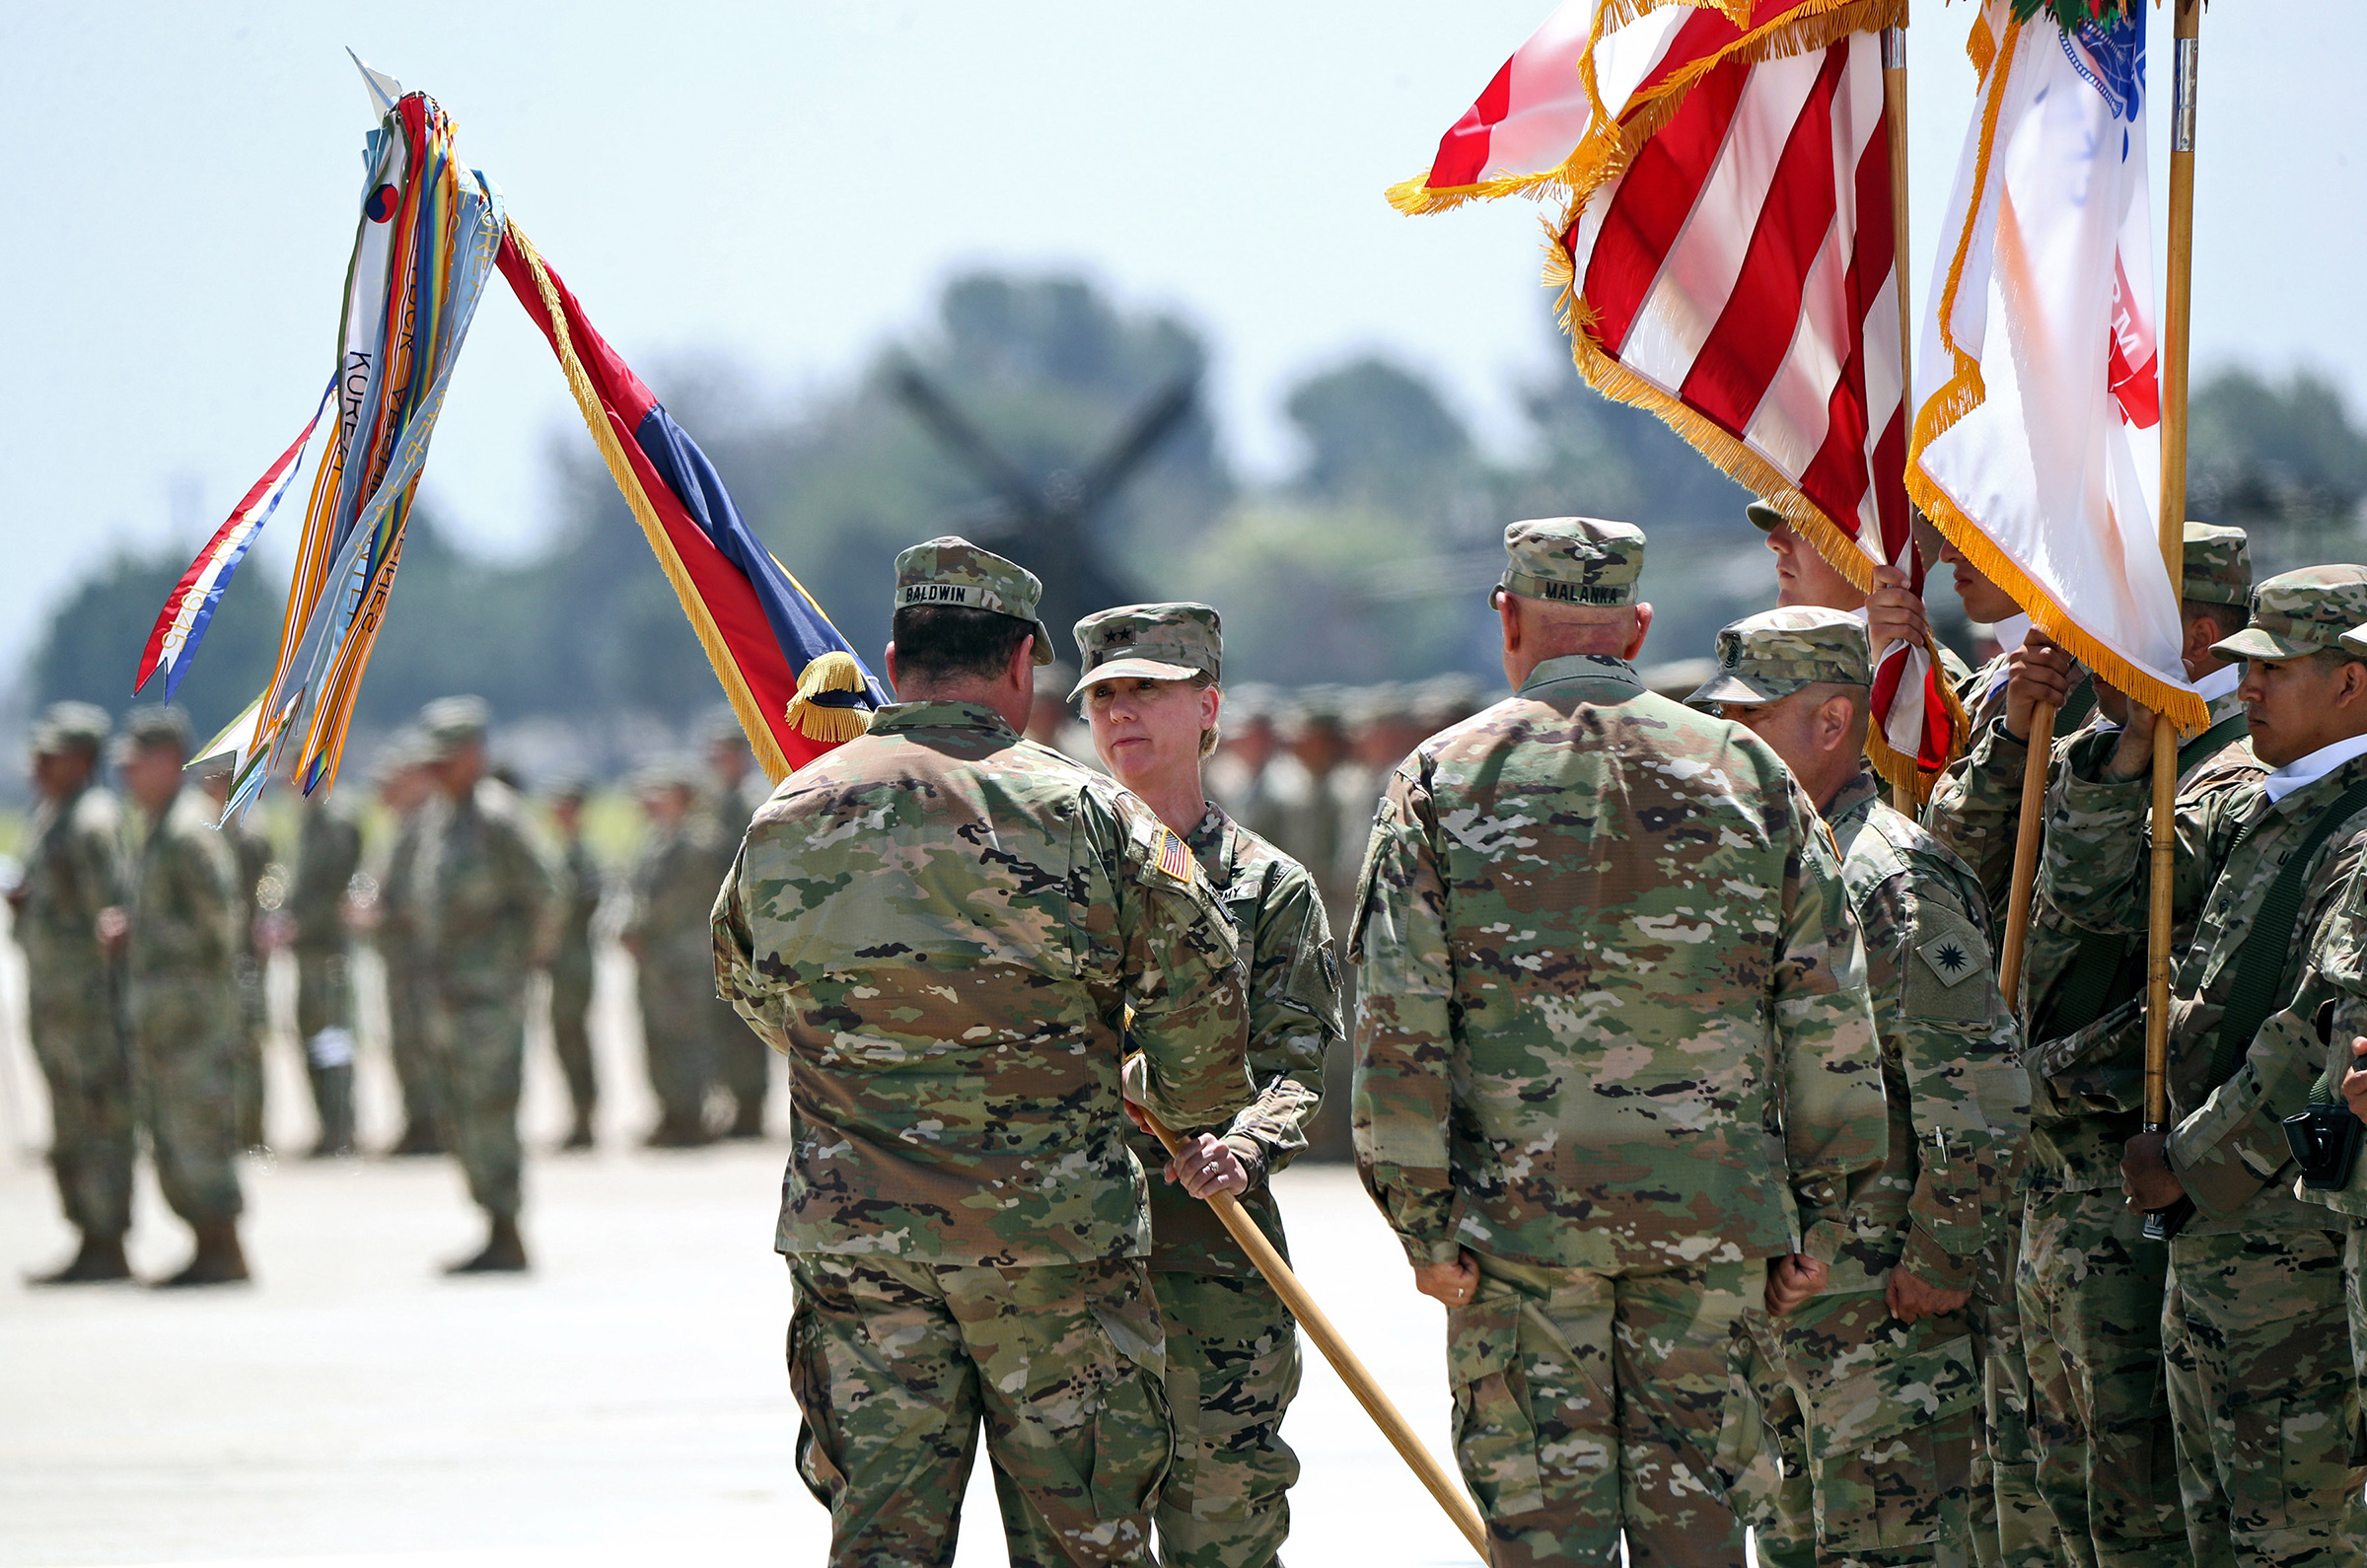 Laura L. Yeager, second from left, is joined by Adjutant General, California Military Department David S. Baldwin, left, during Change of Command Ceremony for the 40th Infantry Division, at the Joint Forces Training Base in Los Alamitos, on June 29, 2019. (Raul Roa—Los Angeles Times)